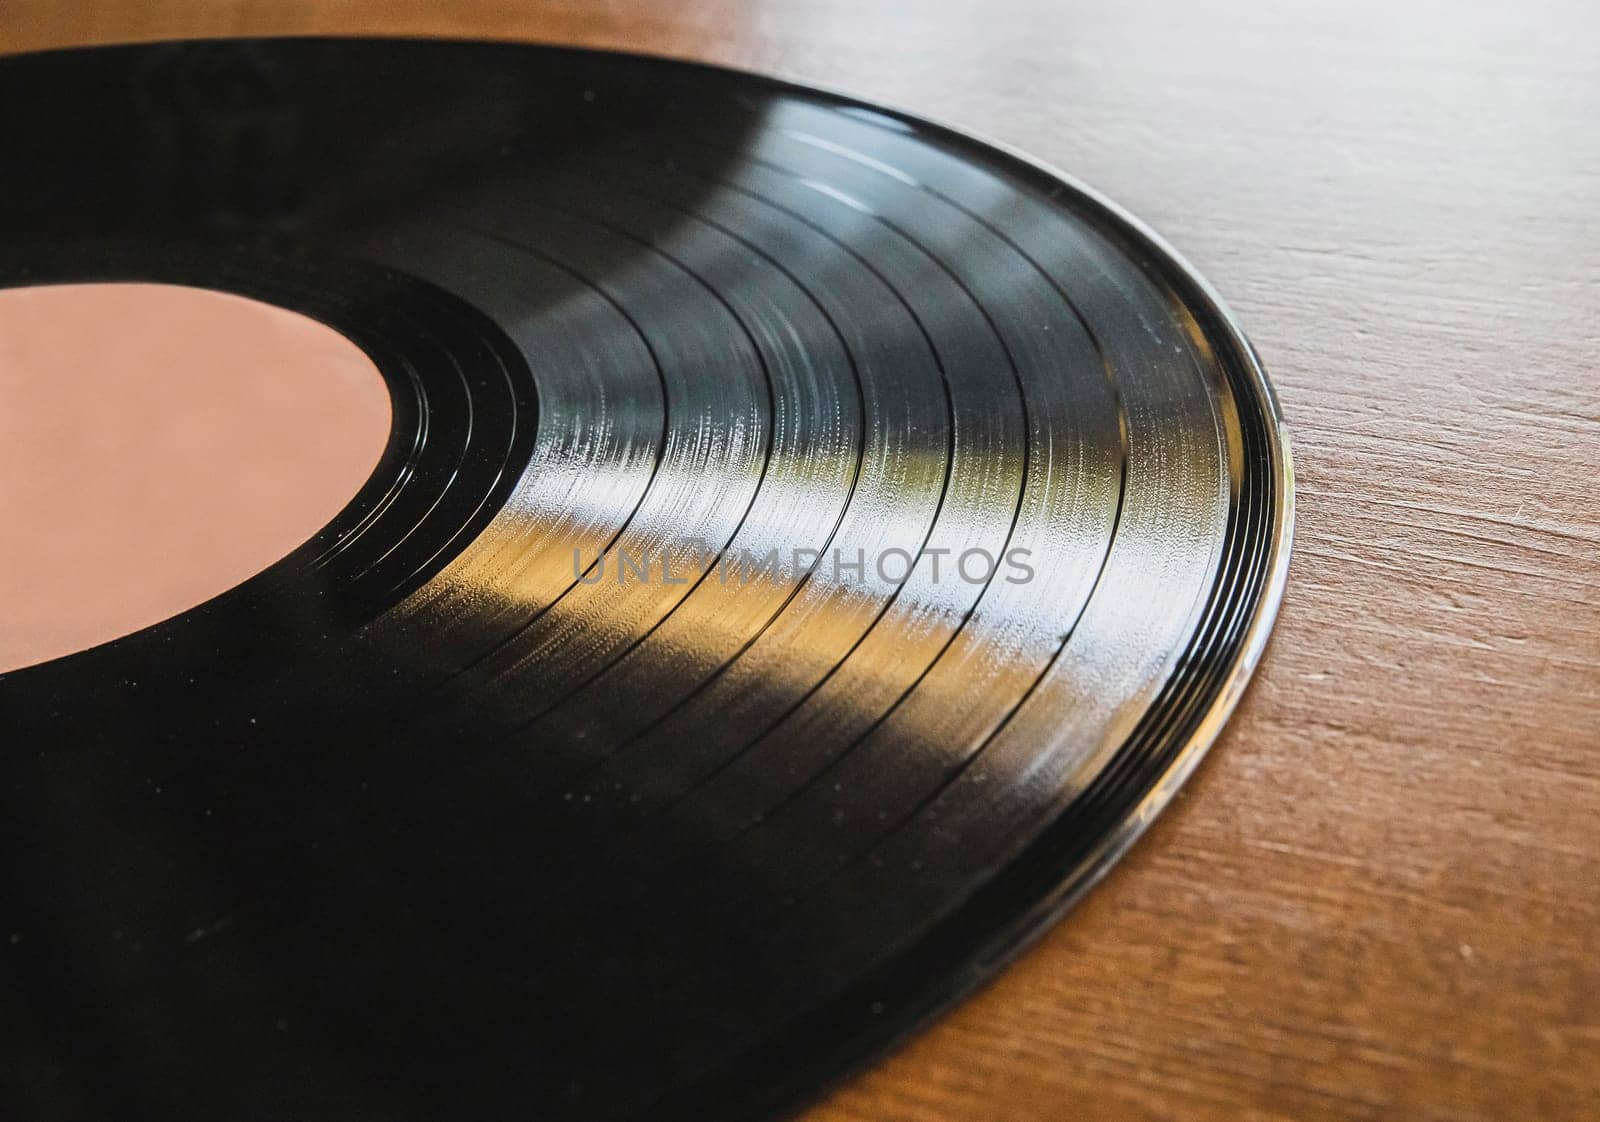 vinyl record lies on brown wooden table.